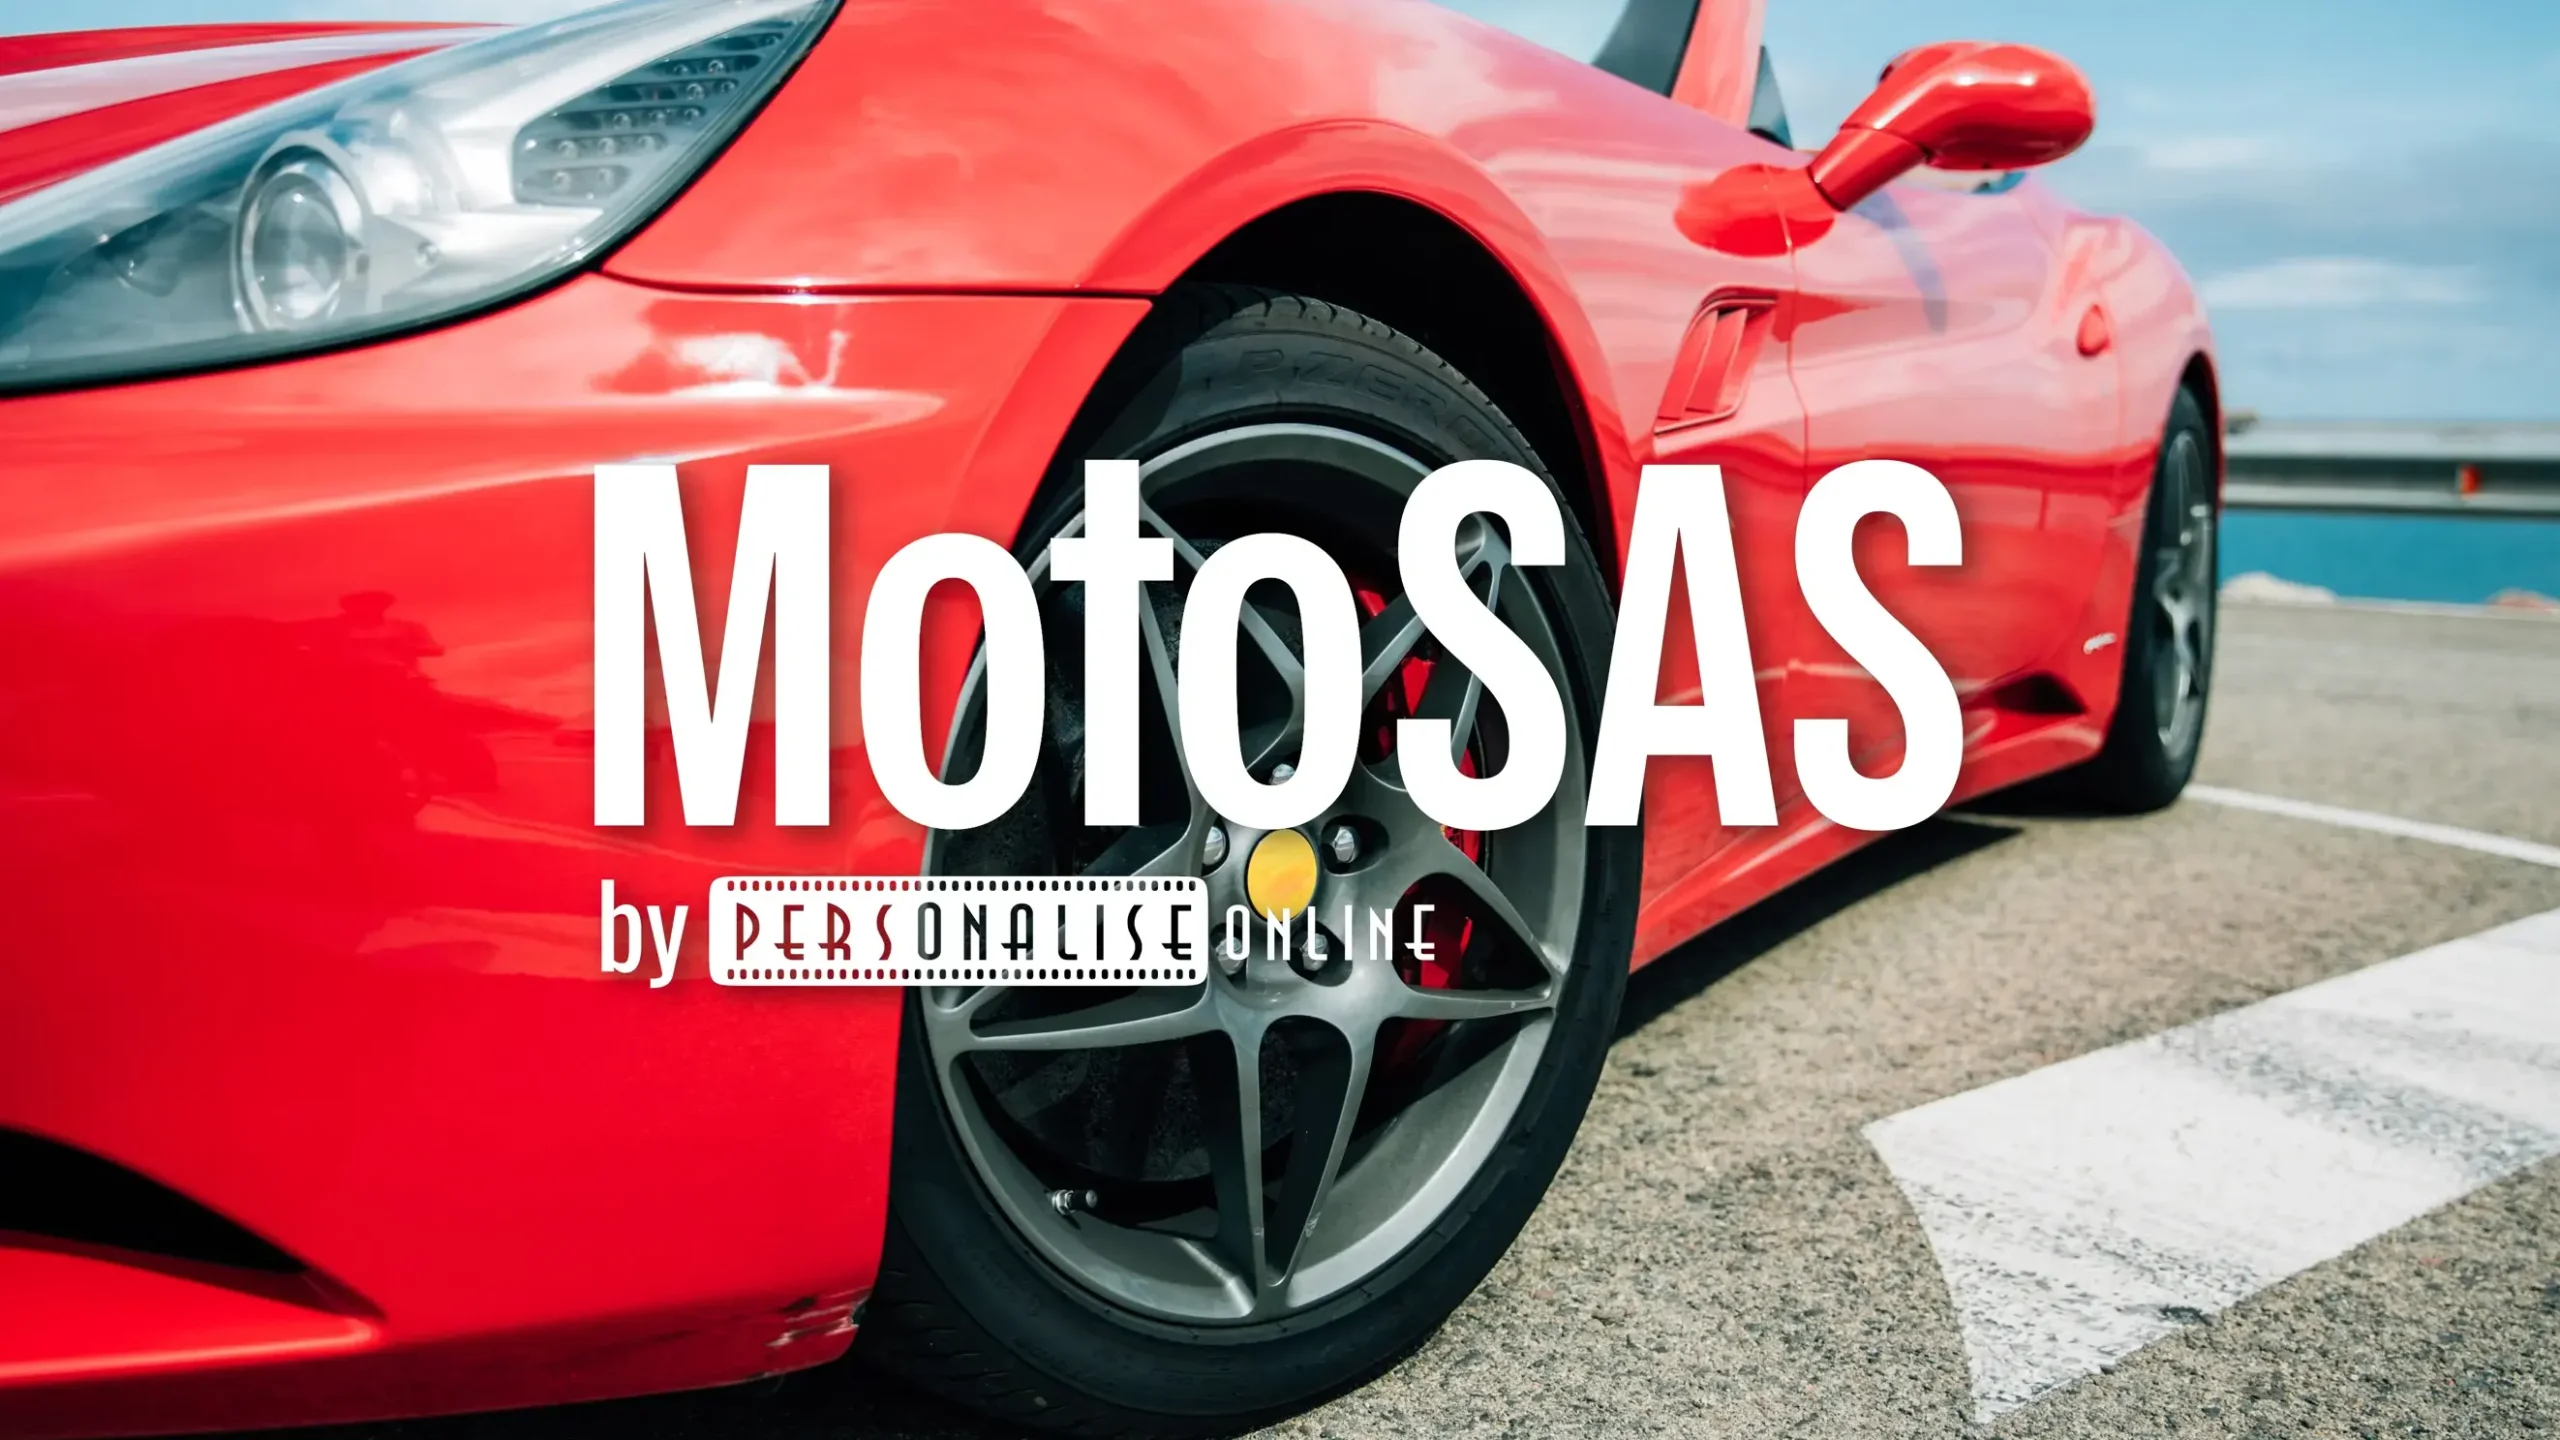 Motosas: What is it? What you should know